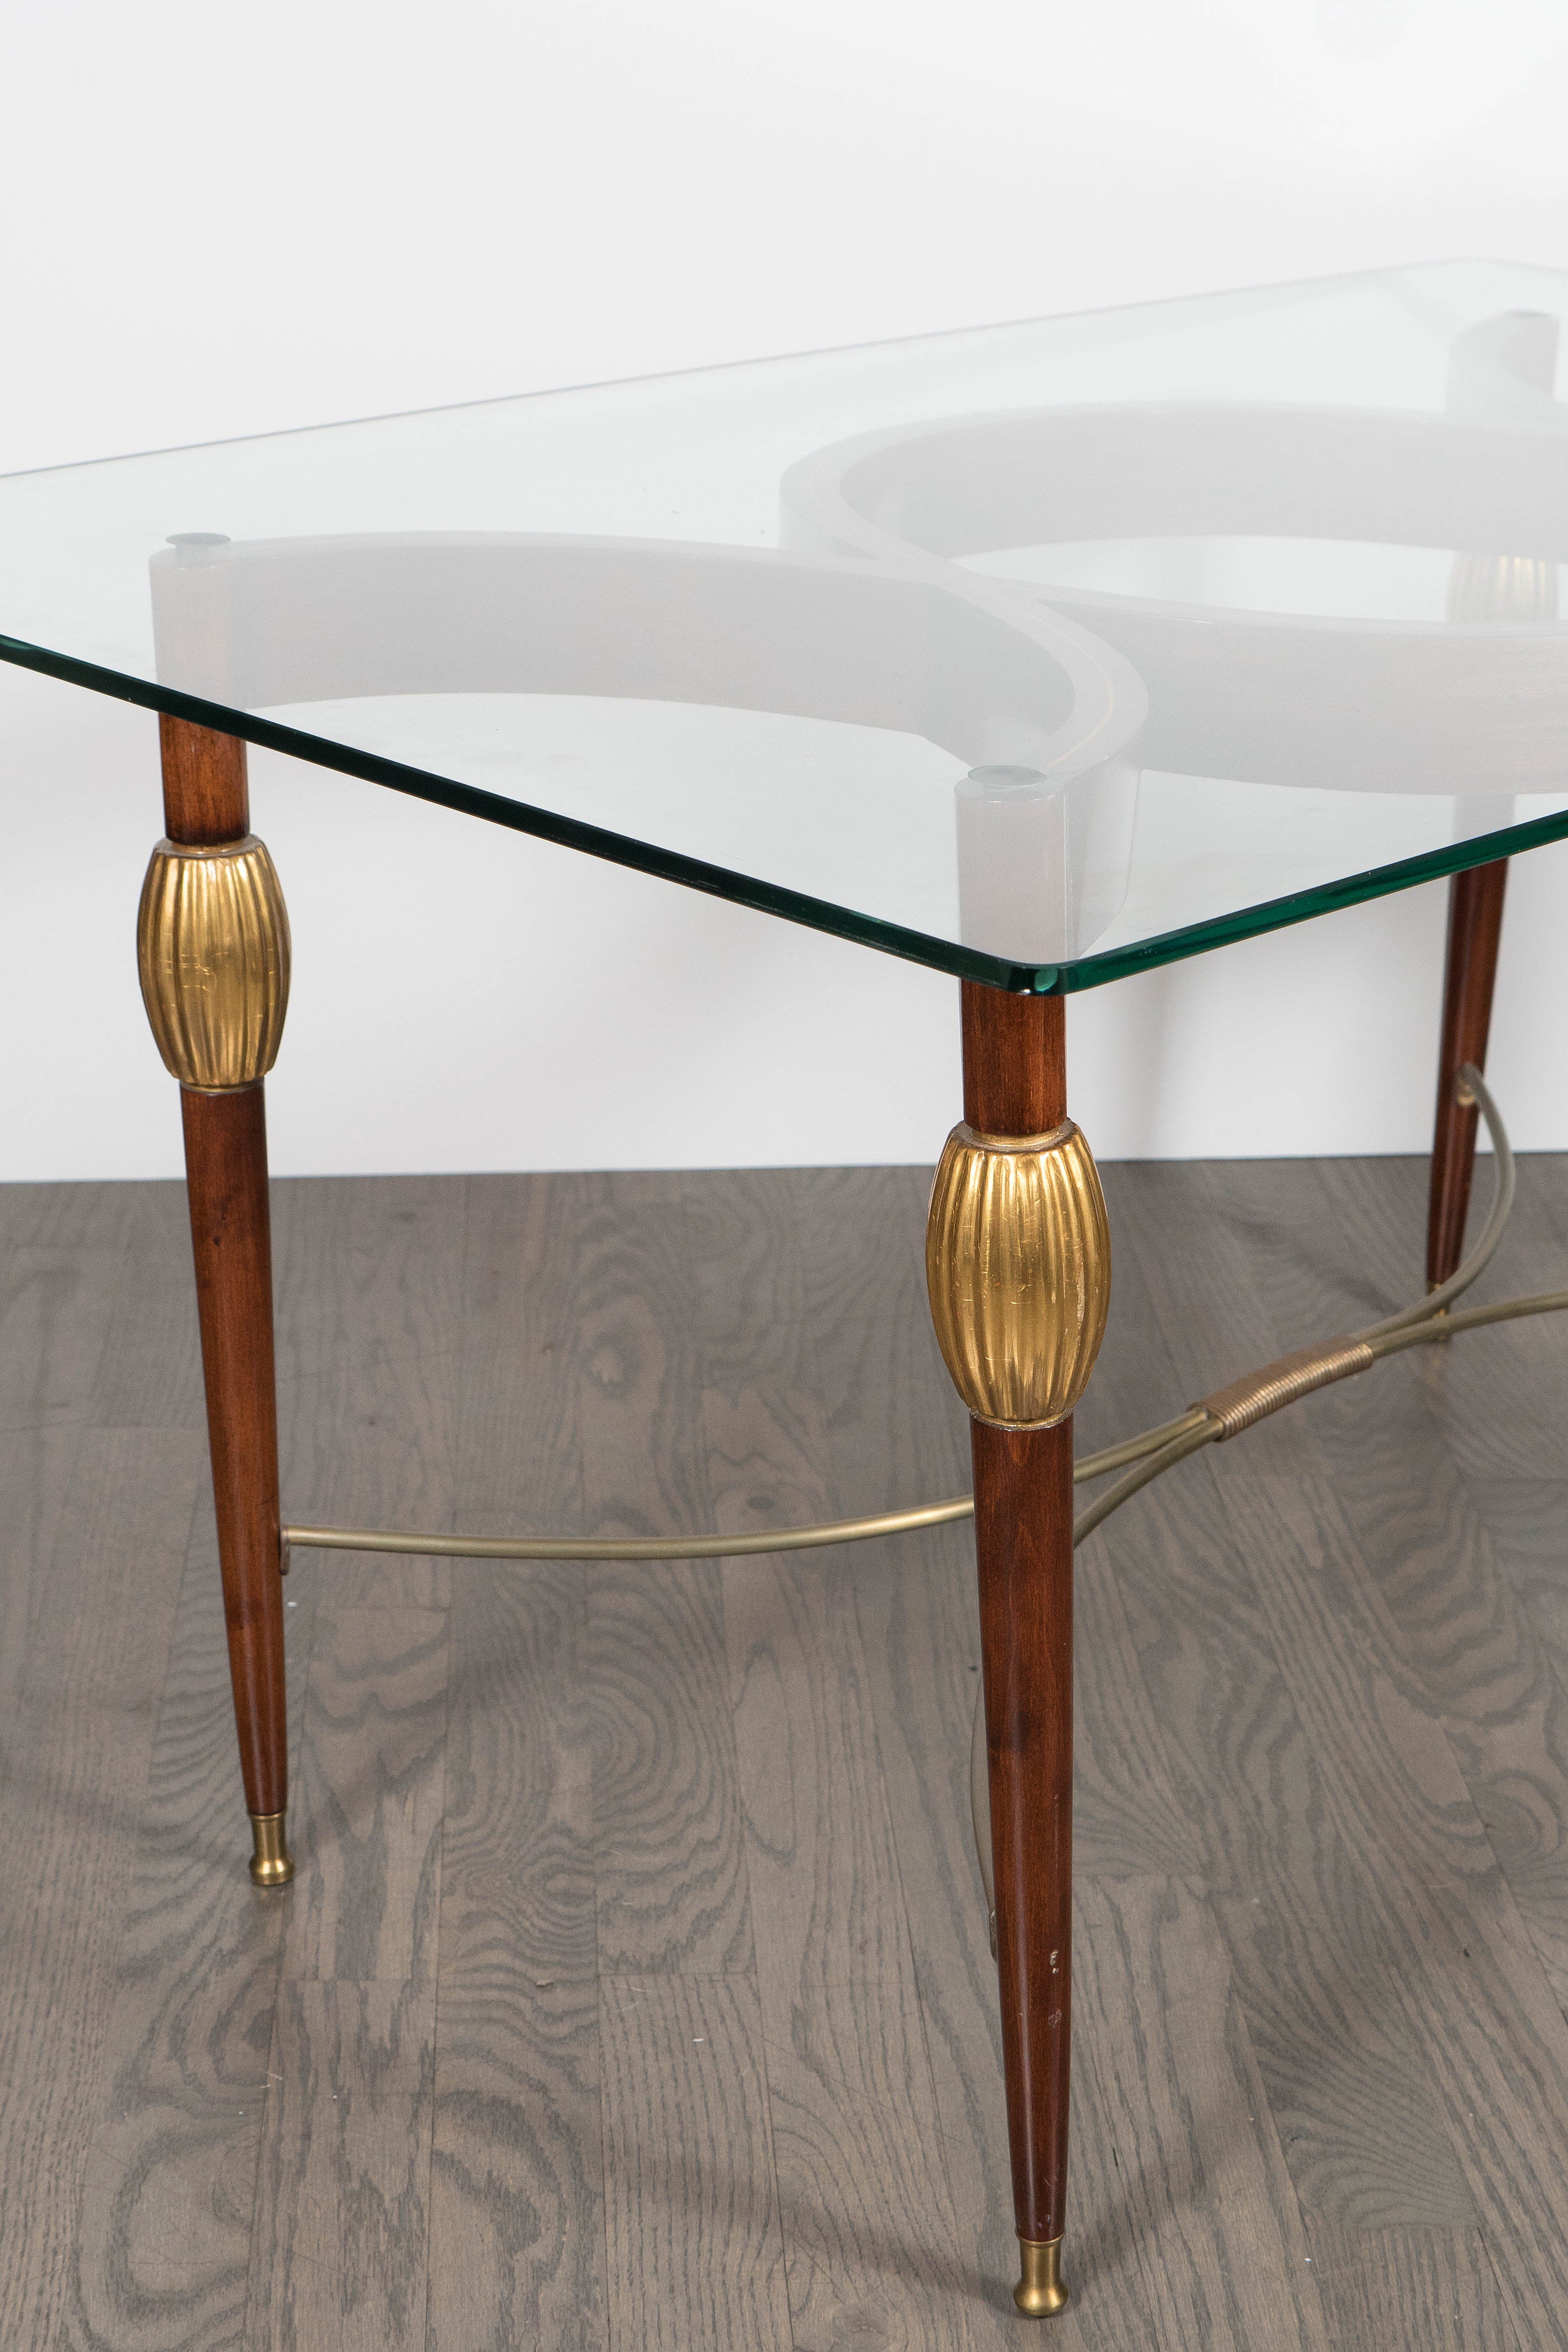 Brass Mid-Century Modern Italian Cocktail Table in the Style of Gio Ponti, circa 1945